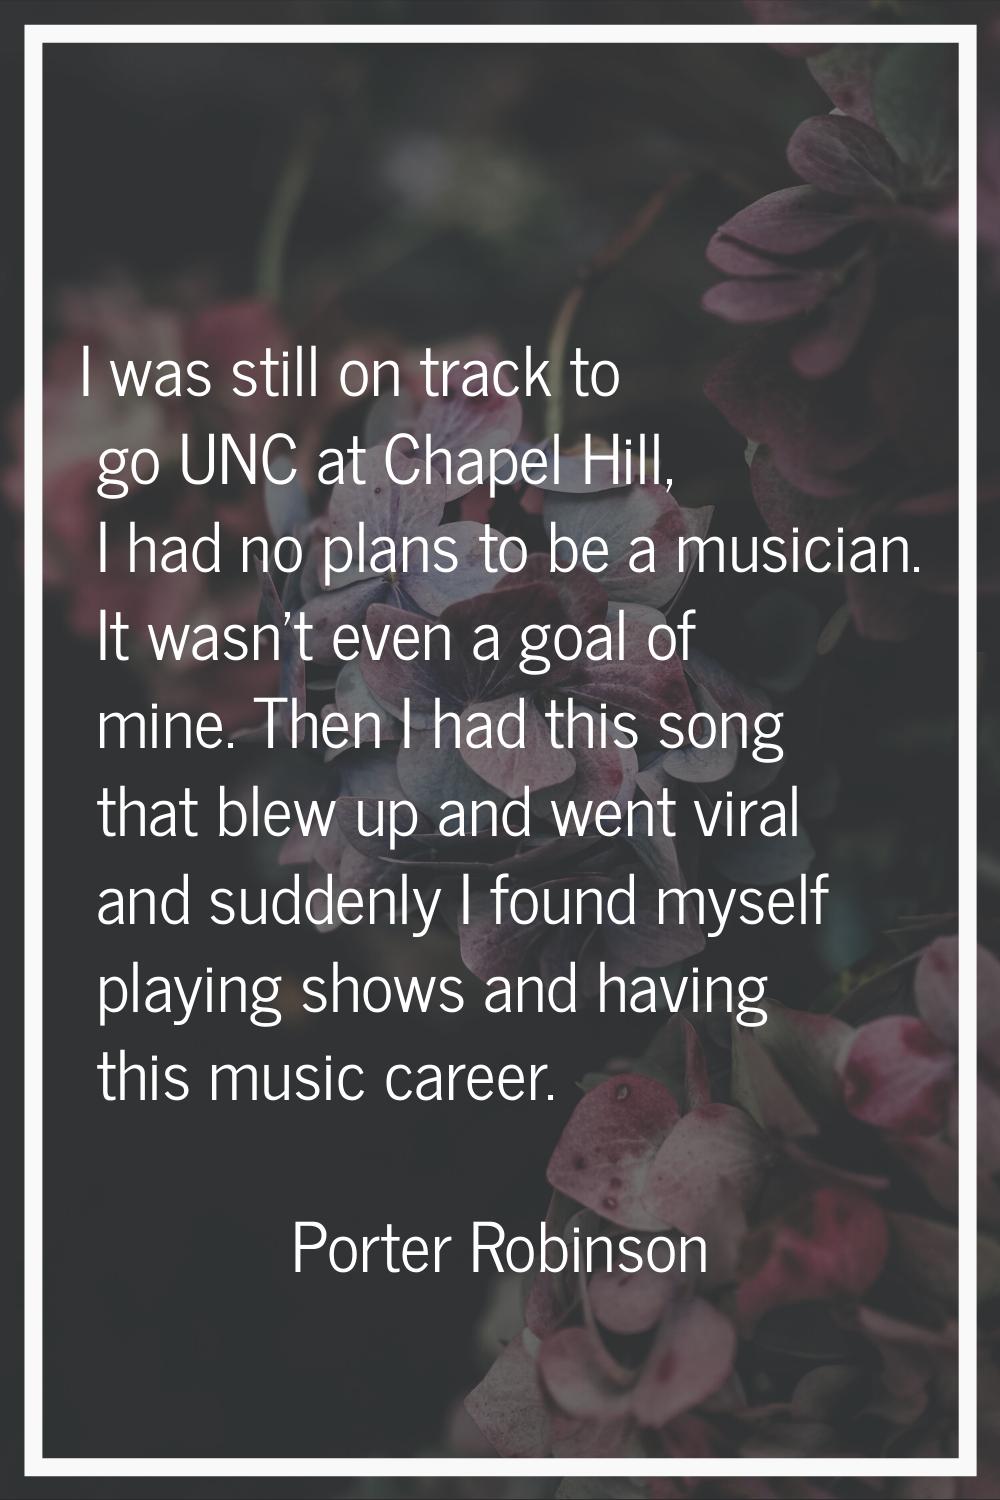 I was still on track to go UNC at Chapel Hill, I had no plans to be a musician. It wasn't even a go